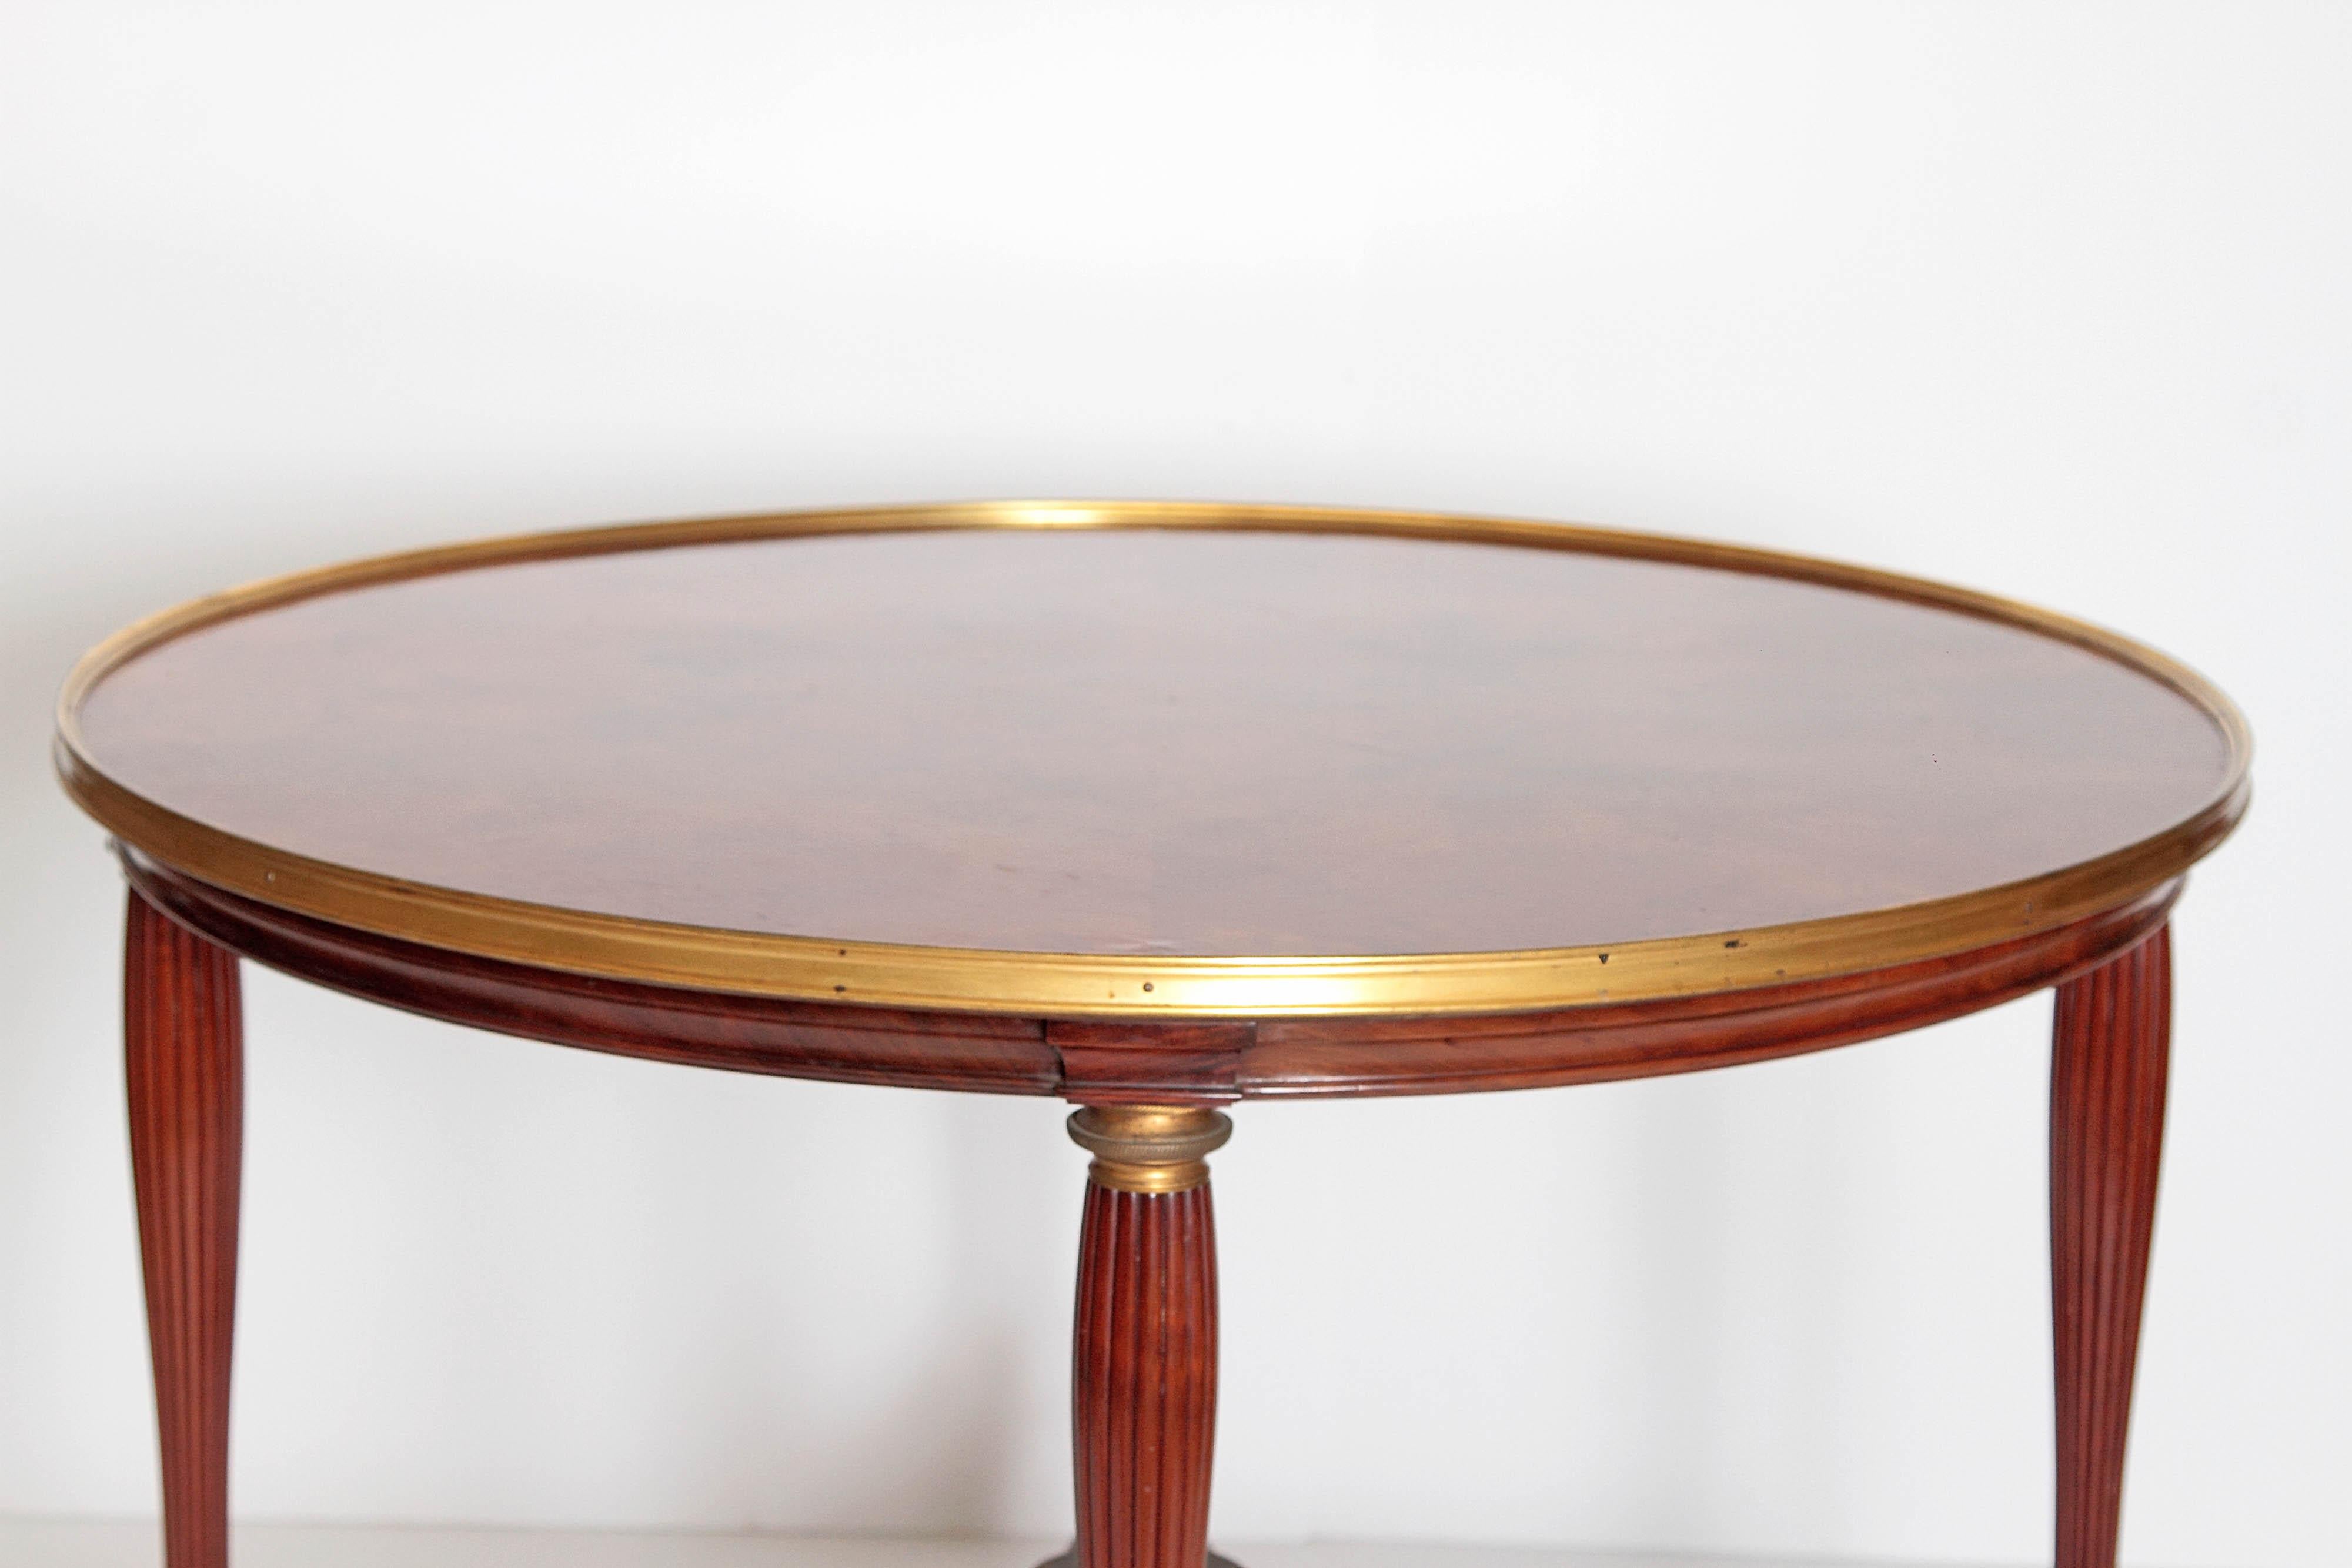 19th Century Russian Neoclassical Centre Table with Burled Walnut Top 1